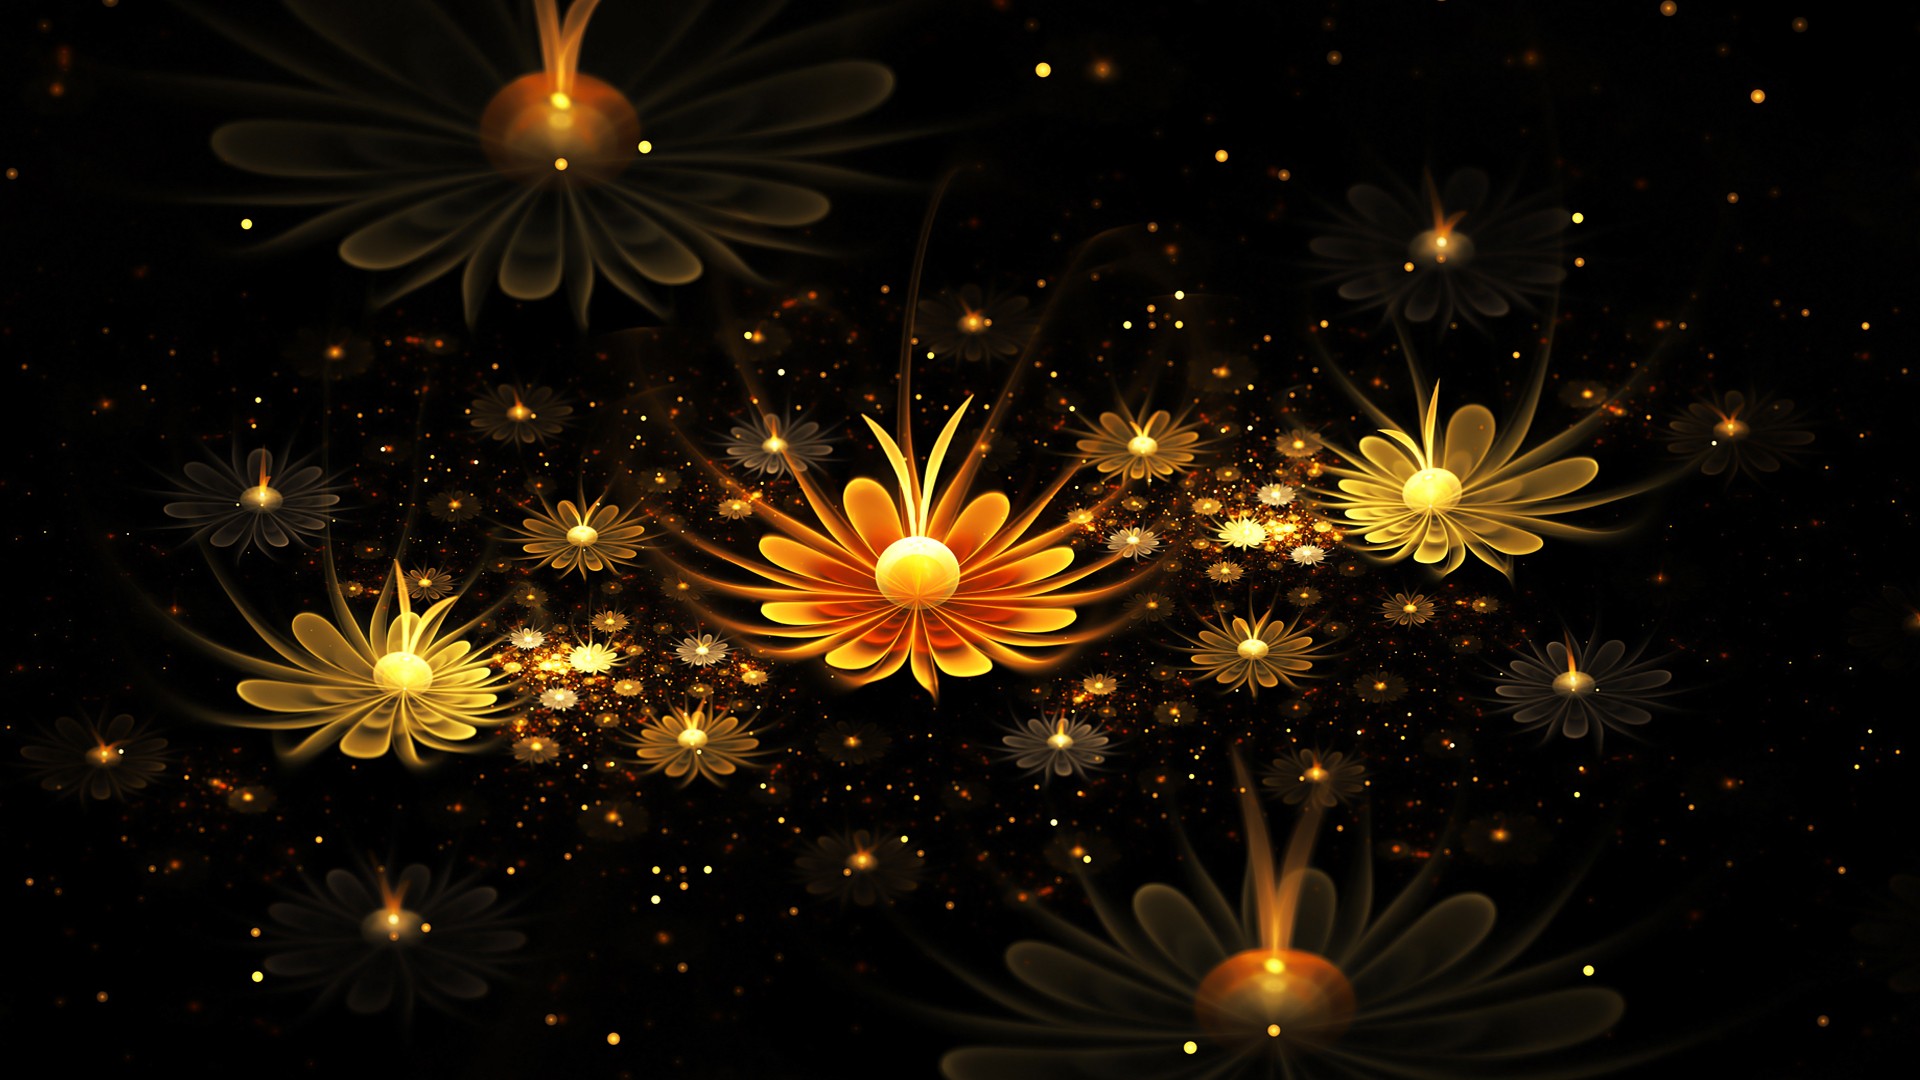 Fractal Fractal Flowers Abstract 1920x1080